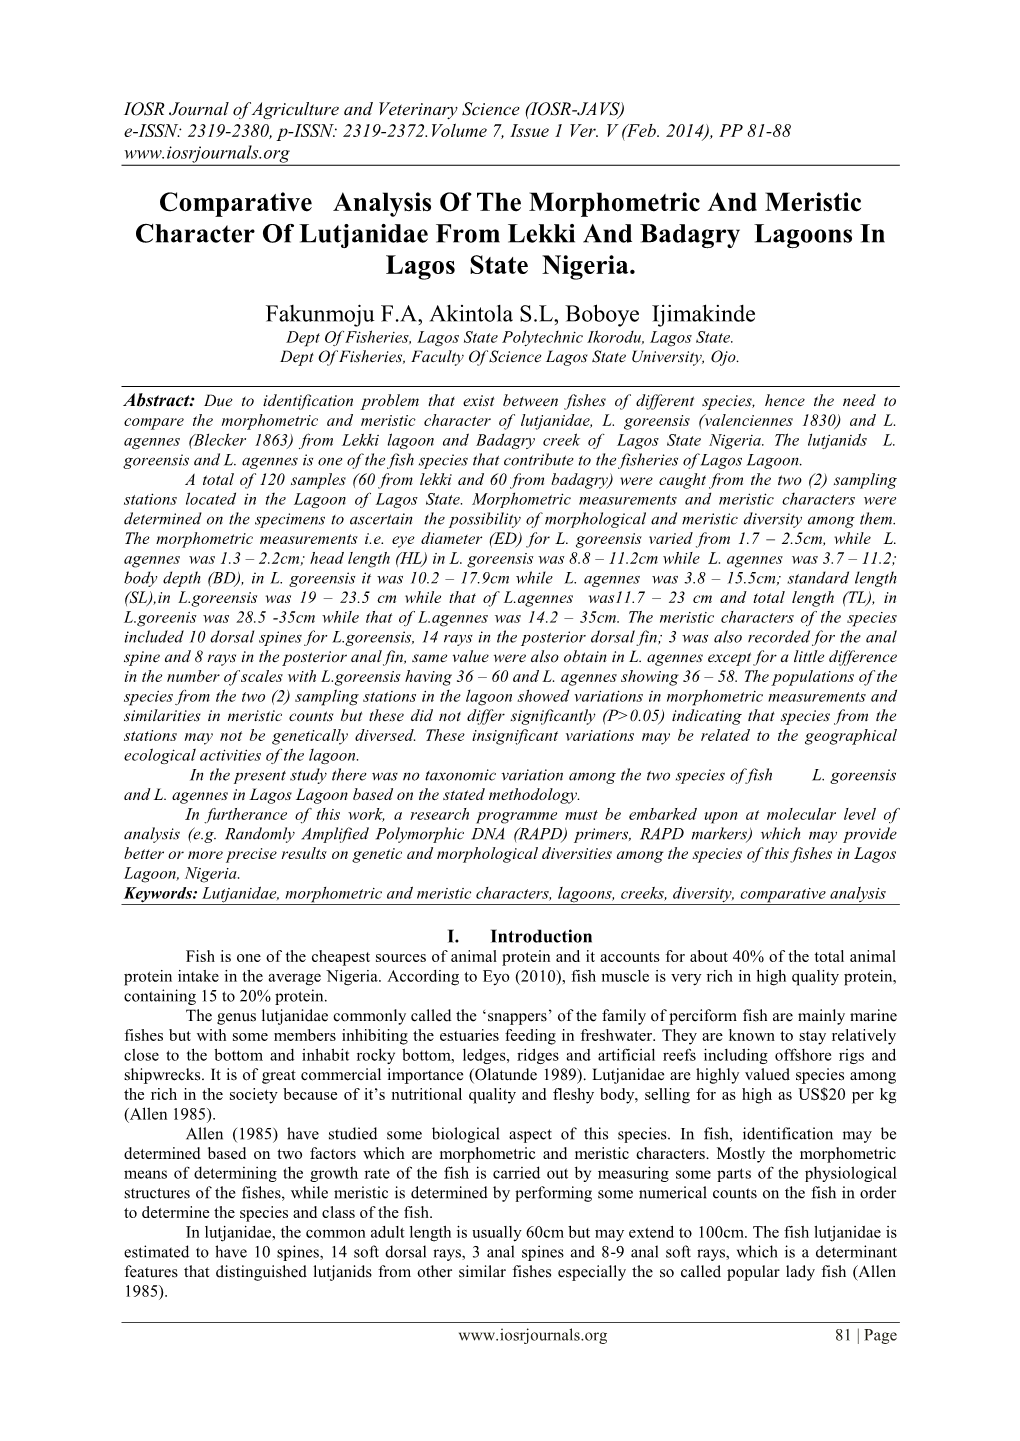 Comparative Analysis of the Morphometric and Meristic Character of Lutjanidae from Lekki and Badagry Lagoons in Lagos State Nigeria